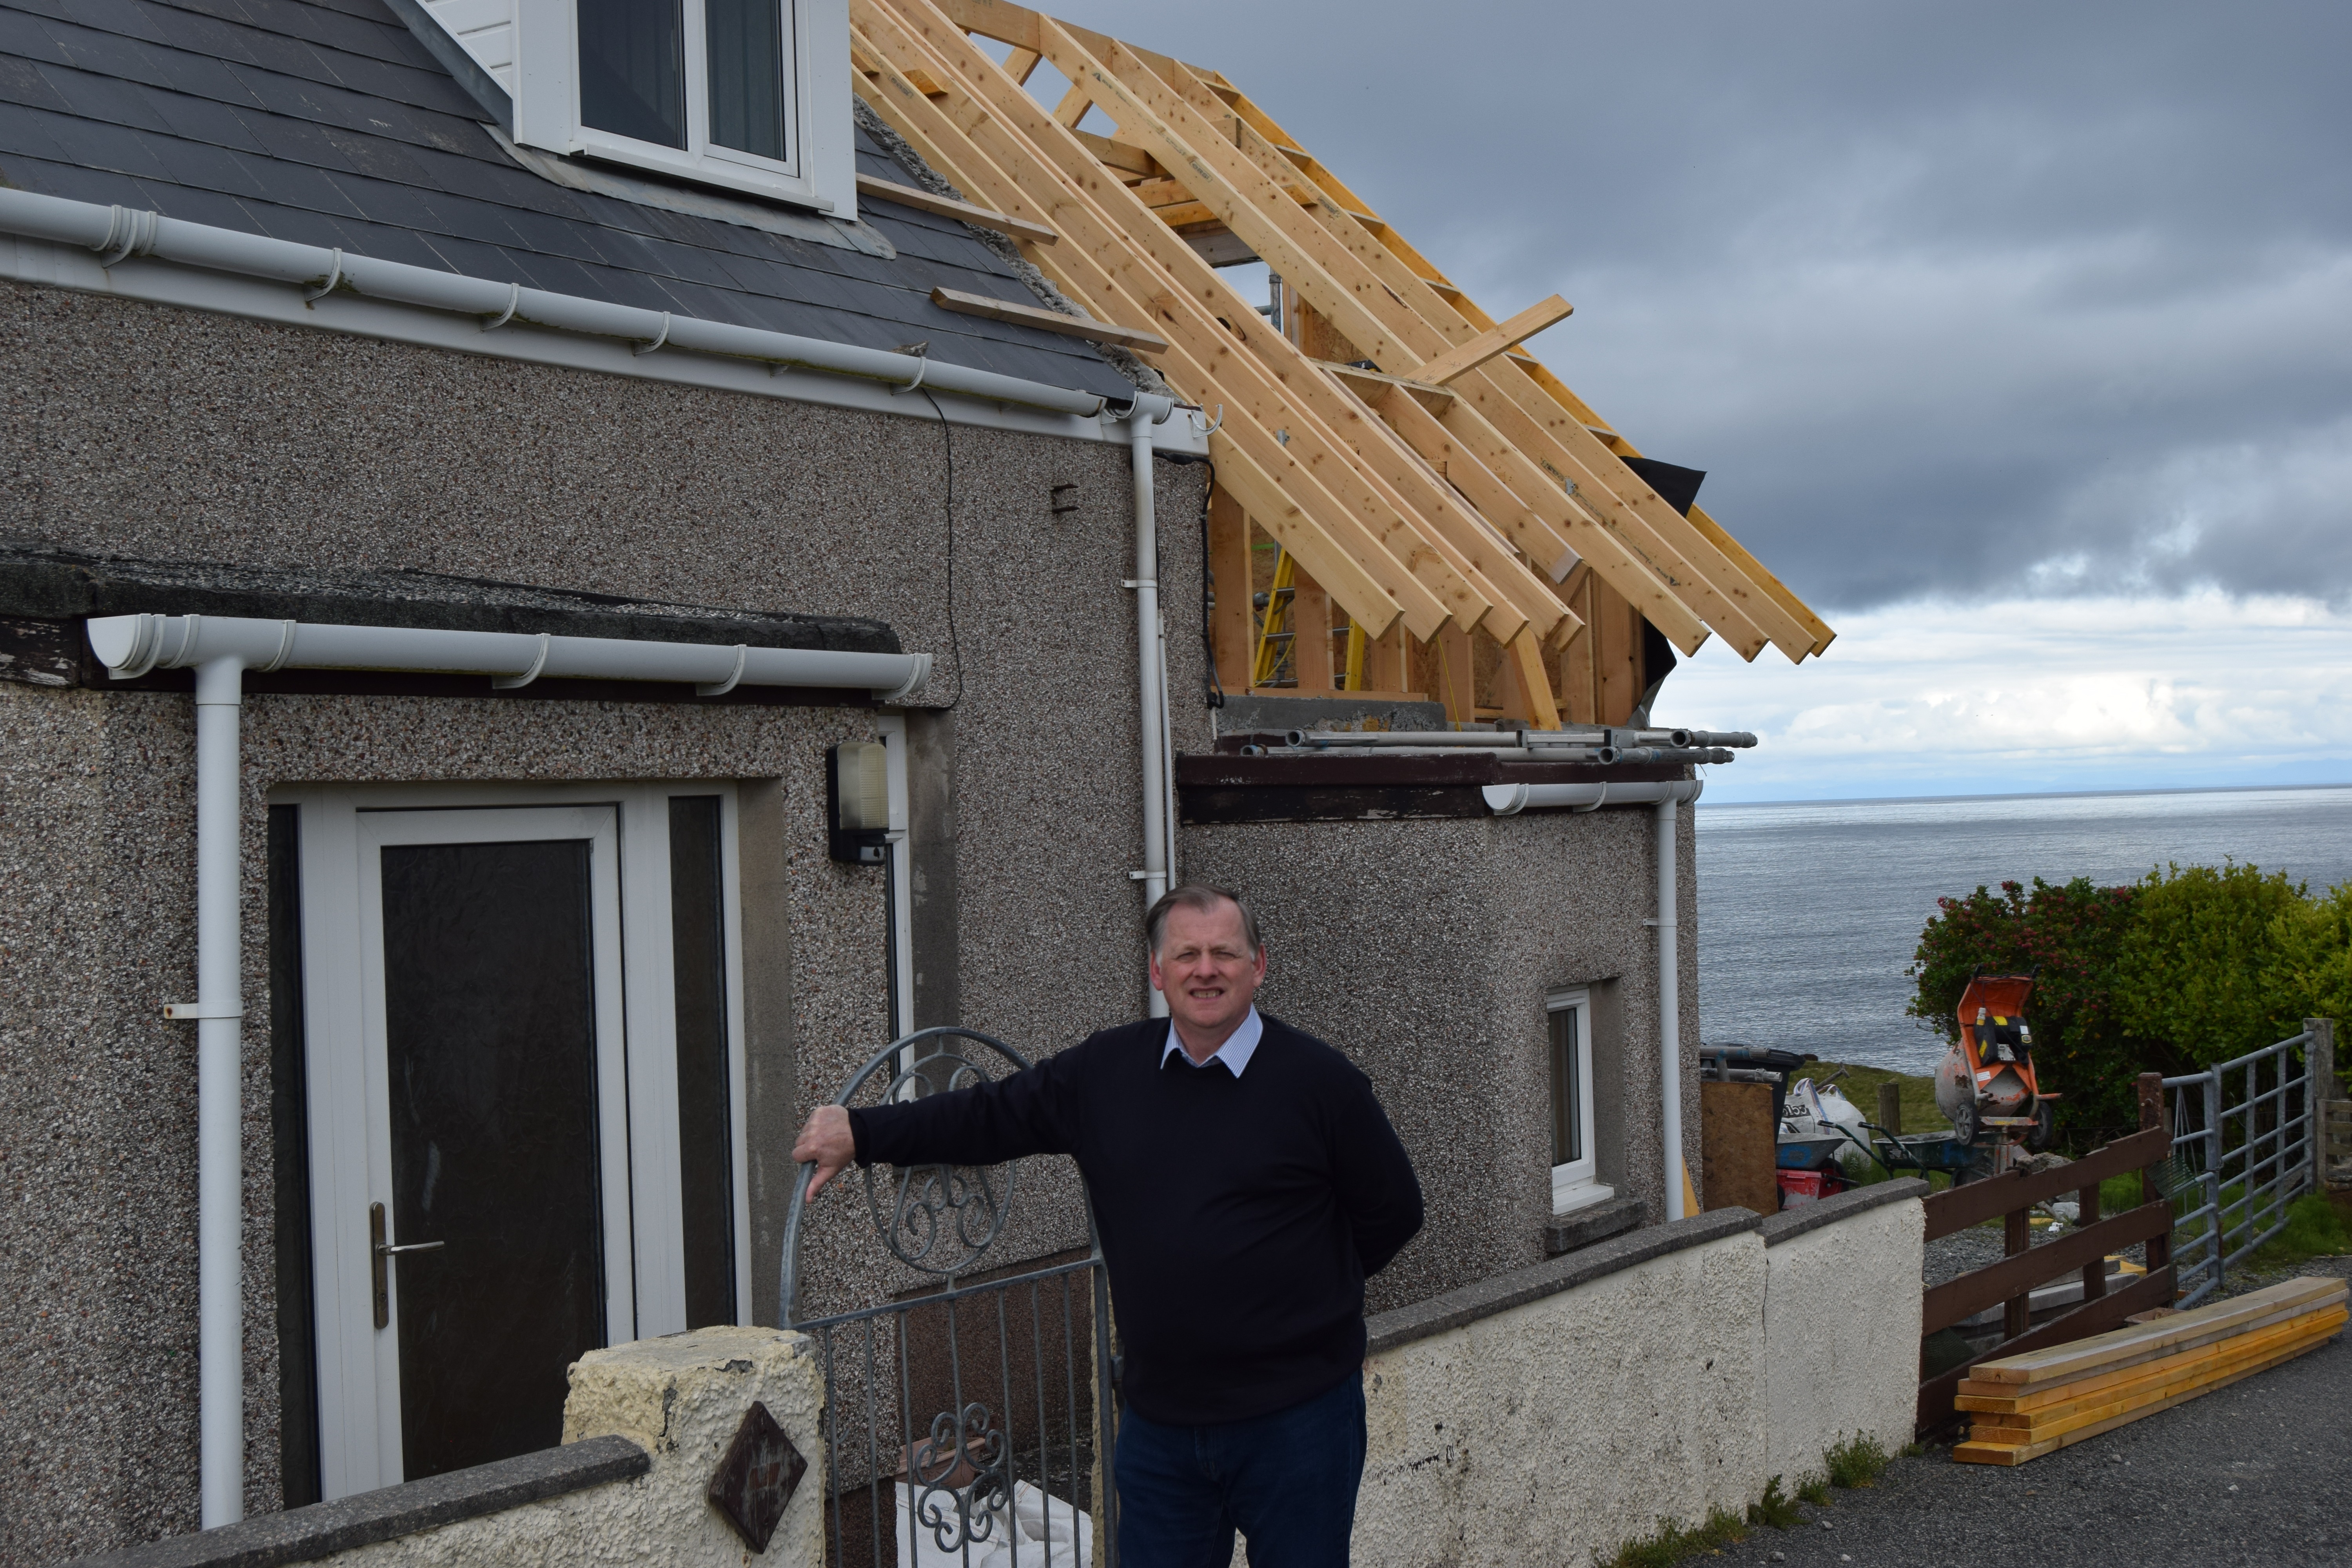 Murdo MacLeod, who works for the Western Isles Council as an Empty Homes Officer, is up for the award after brining 61 properties back into use in the first year of the service on the Western Isles